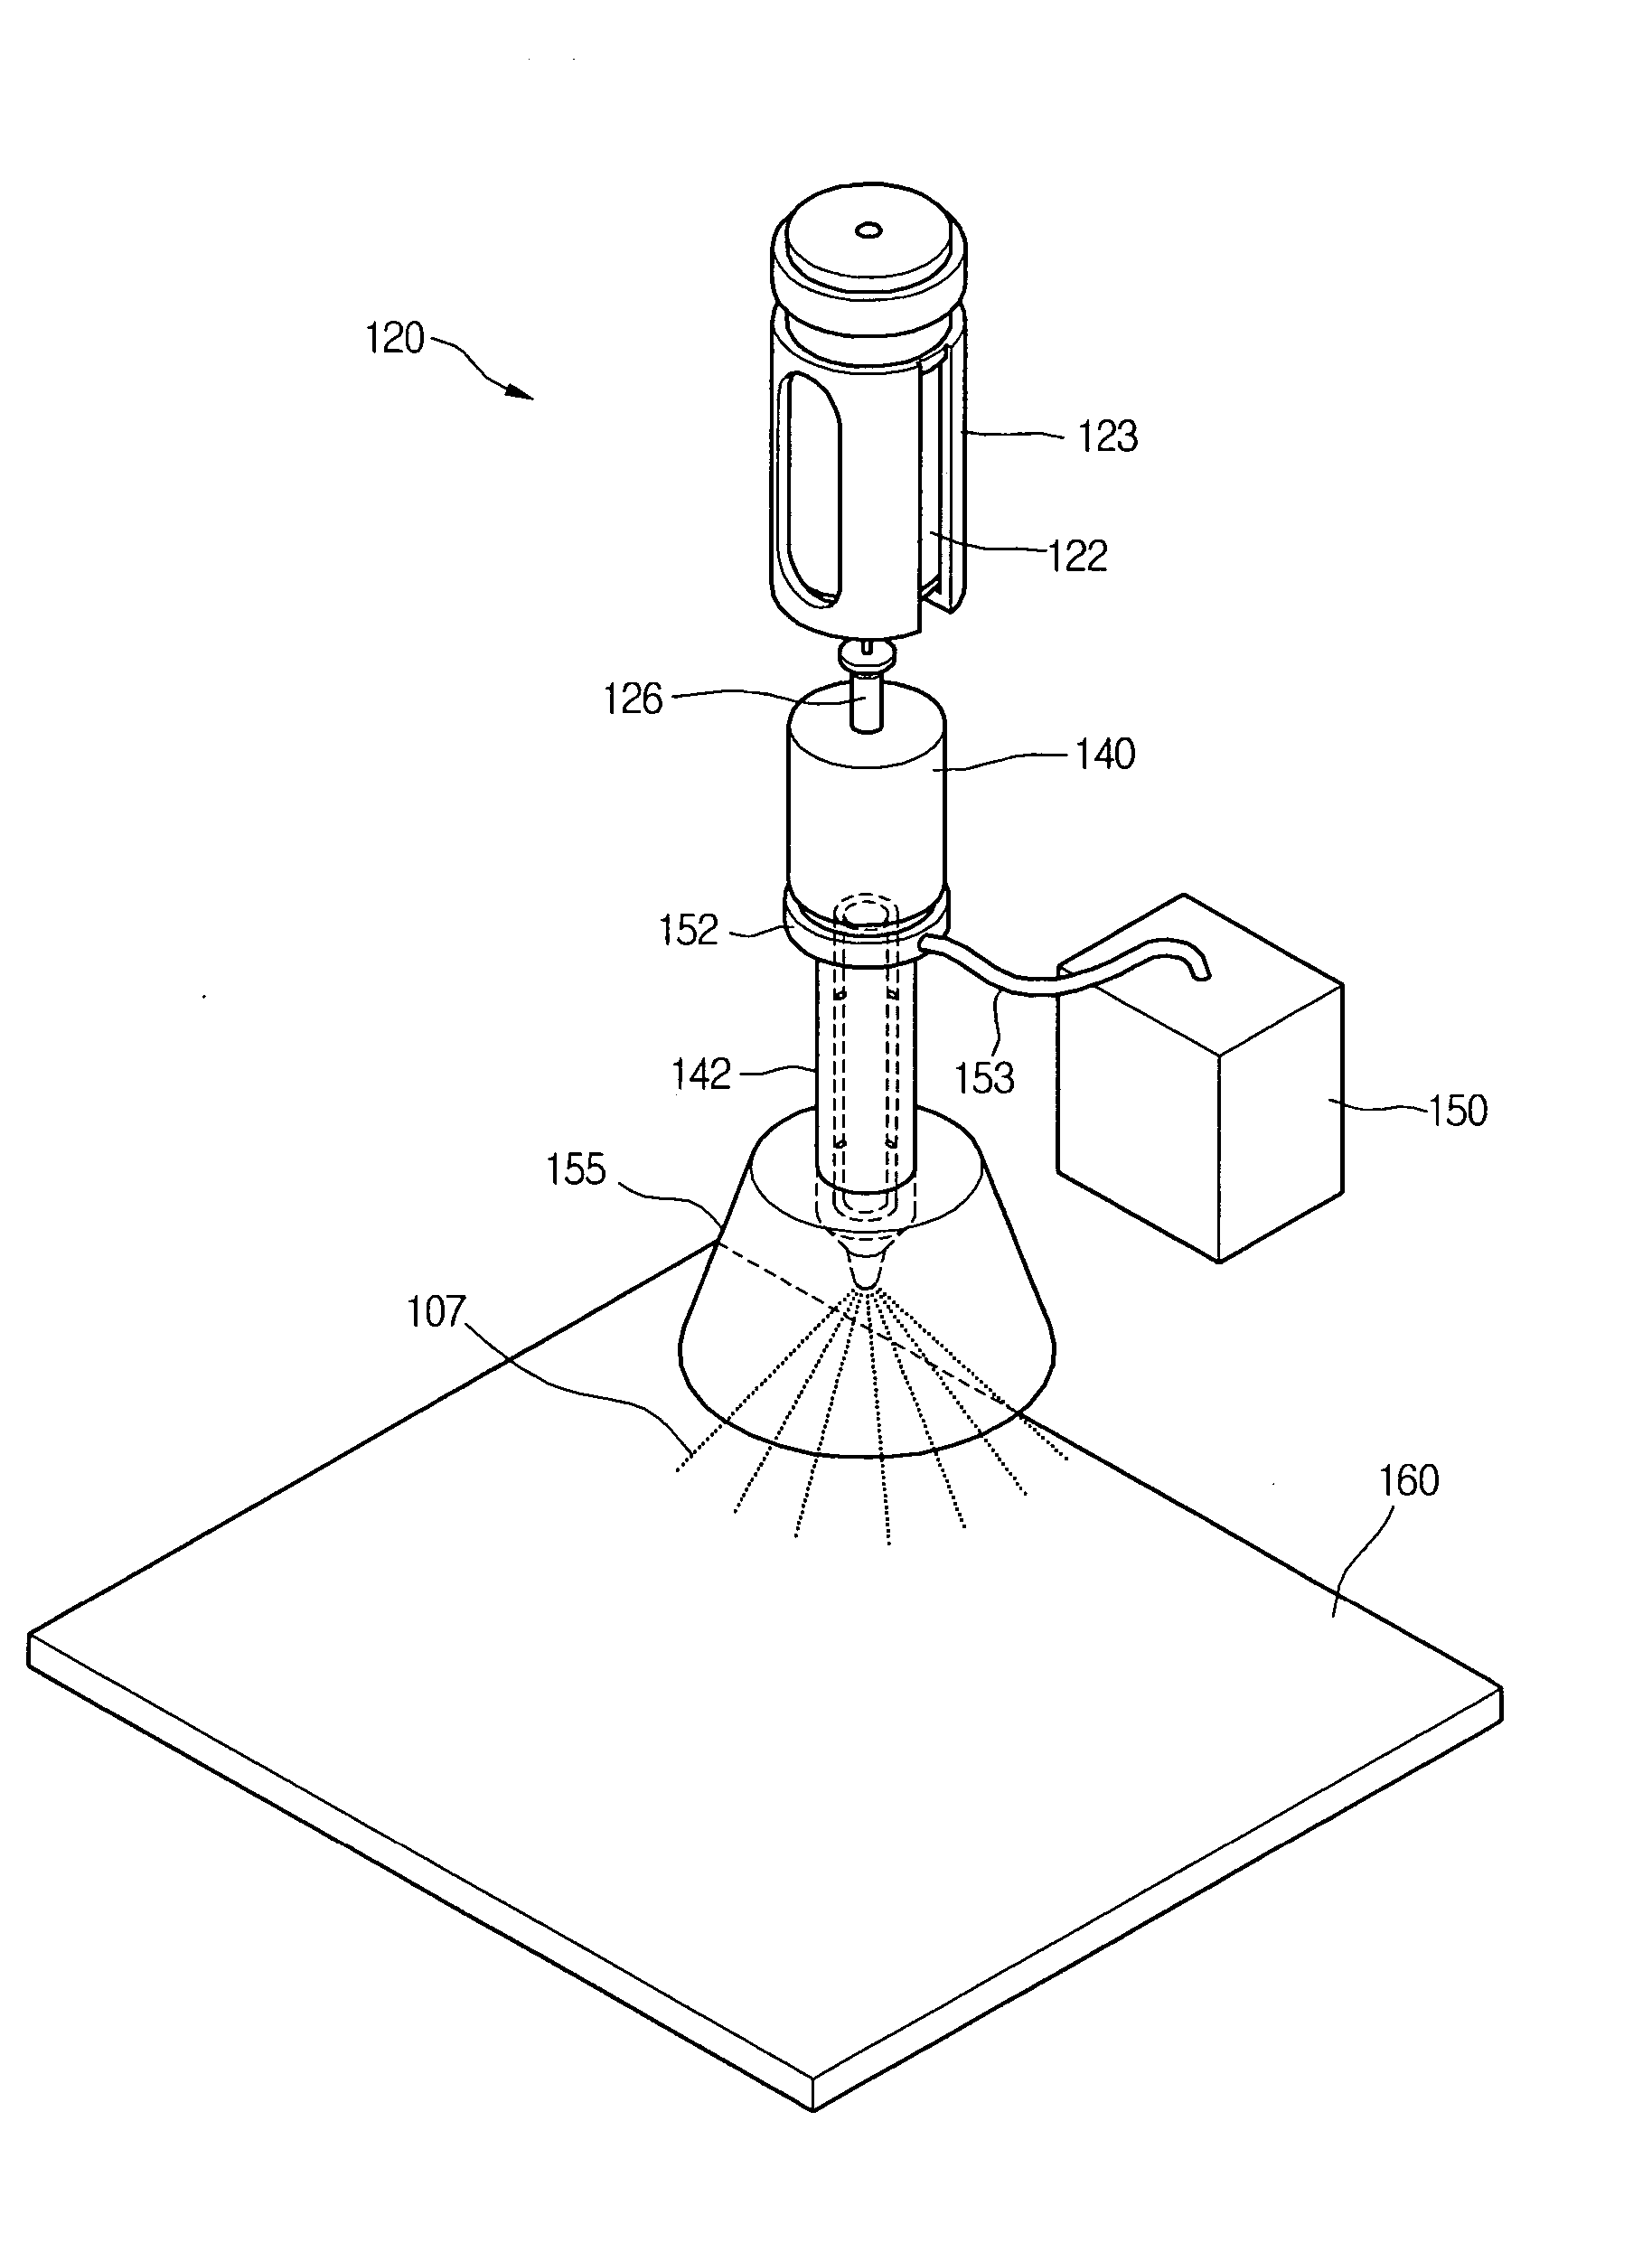 Liquid crystal spraying apparatus and method for manufacturing of liquid crystal display device using the same